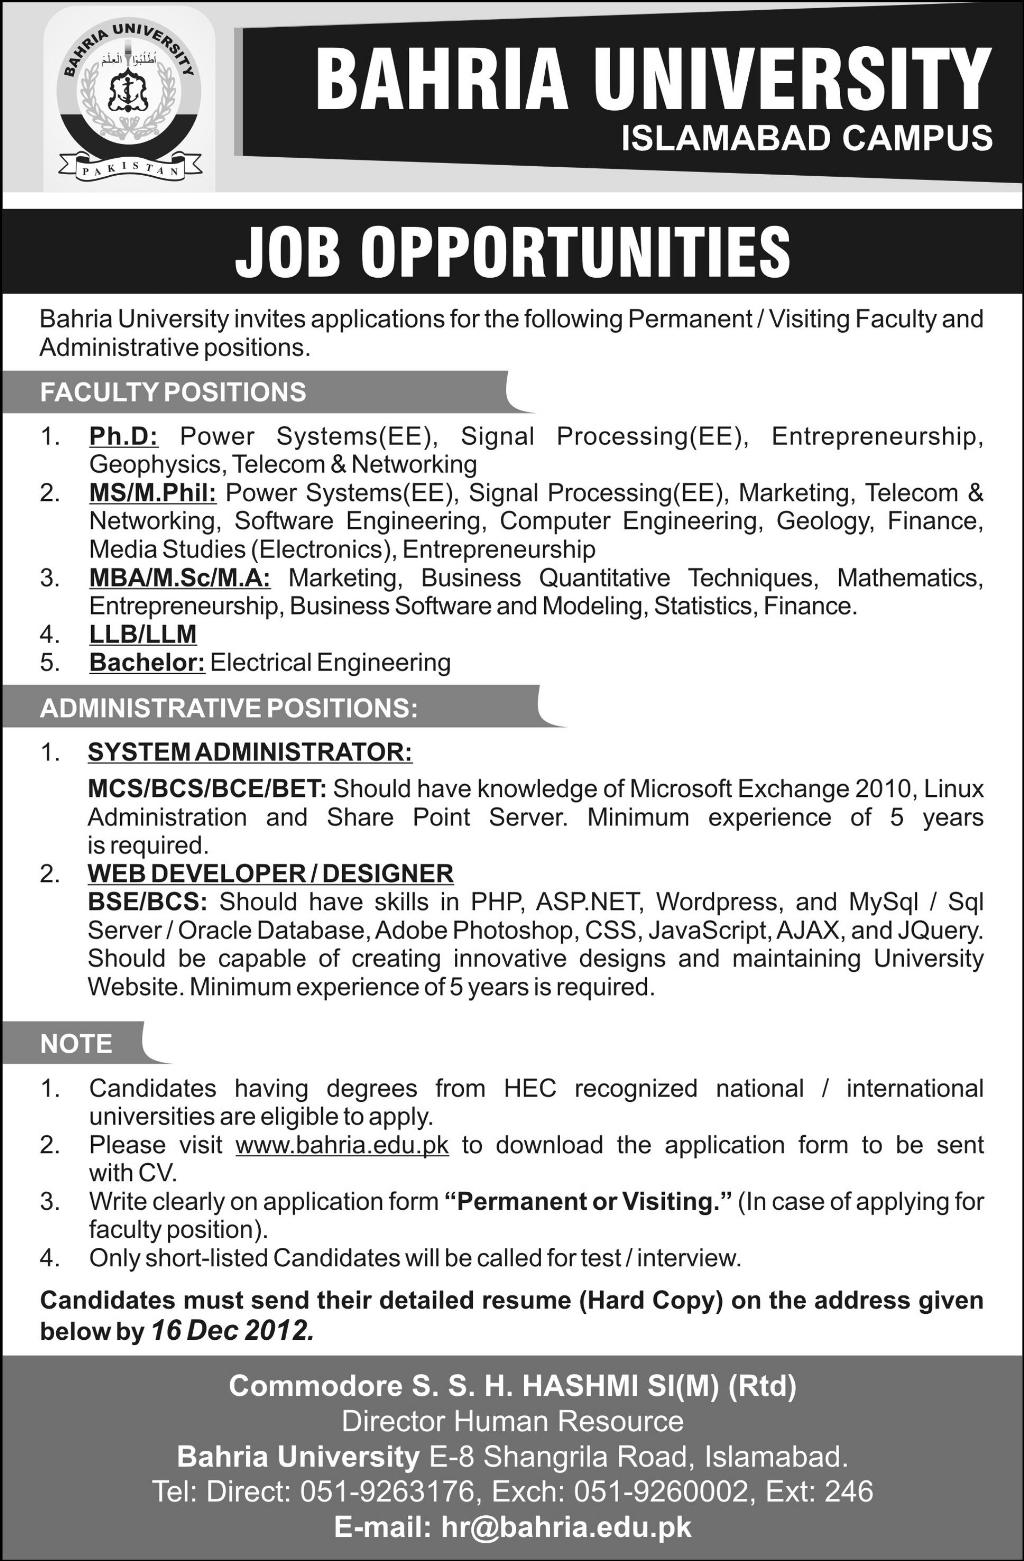 Bahria University Islamabad Jobs 2012 for Faculty & Administrative Positions